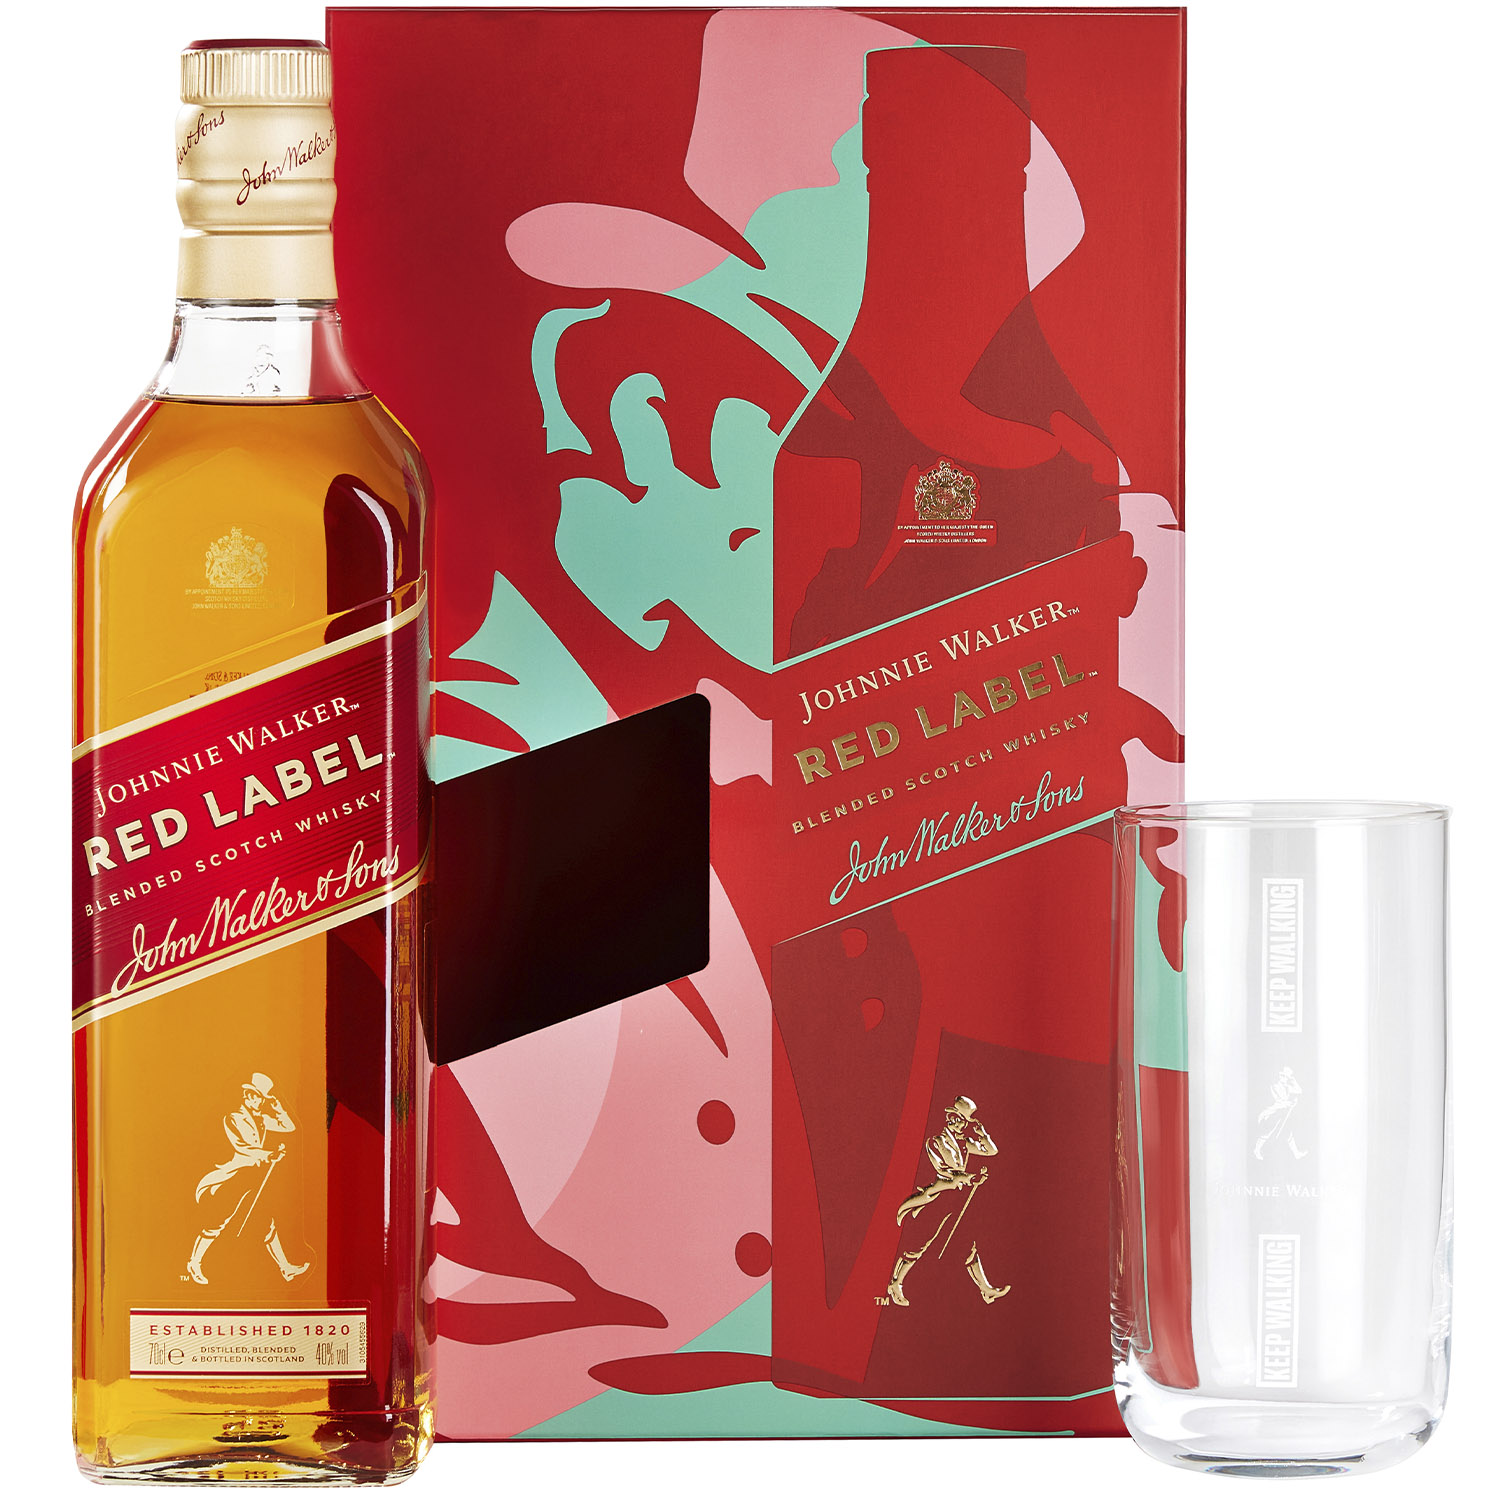 Набор: виски Johnnie Walker Red label Blended Scotch Whisky 40%, 0,7 л + 2 бокала - фото 3